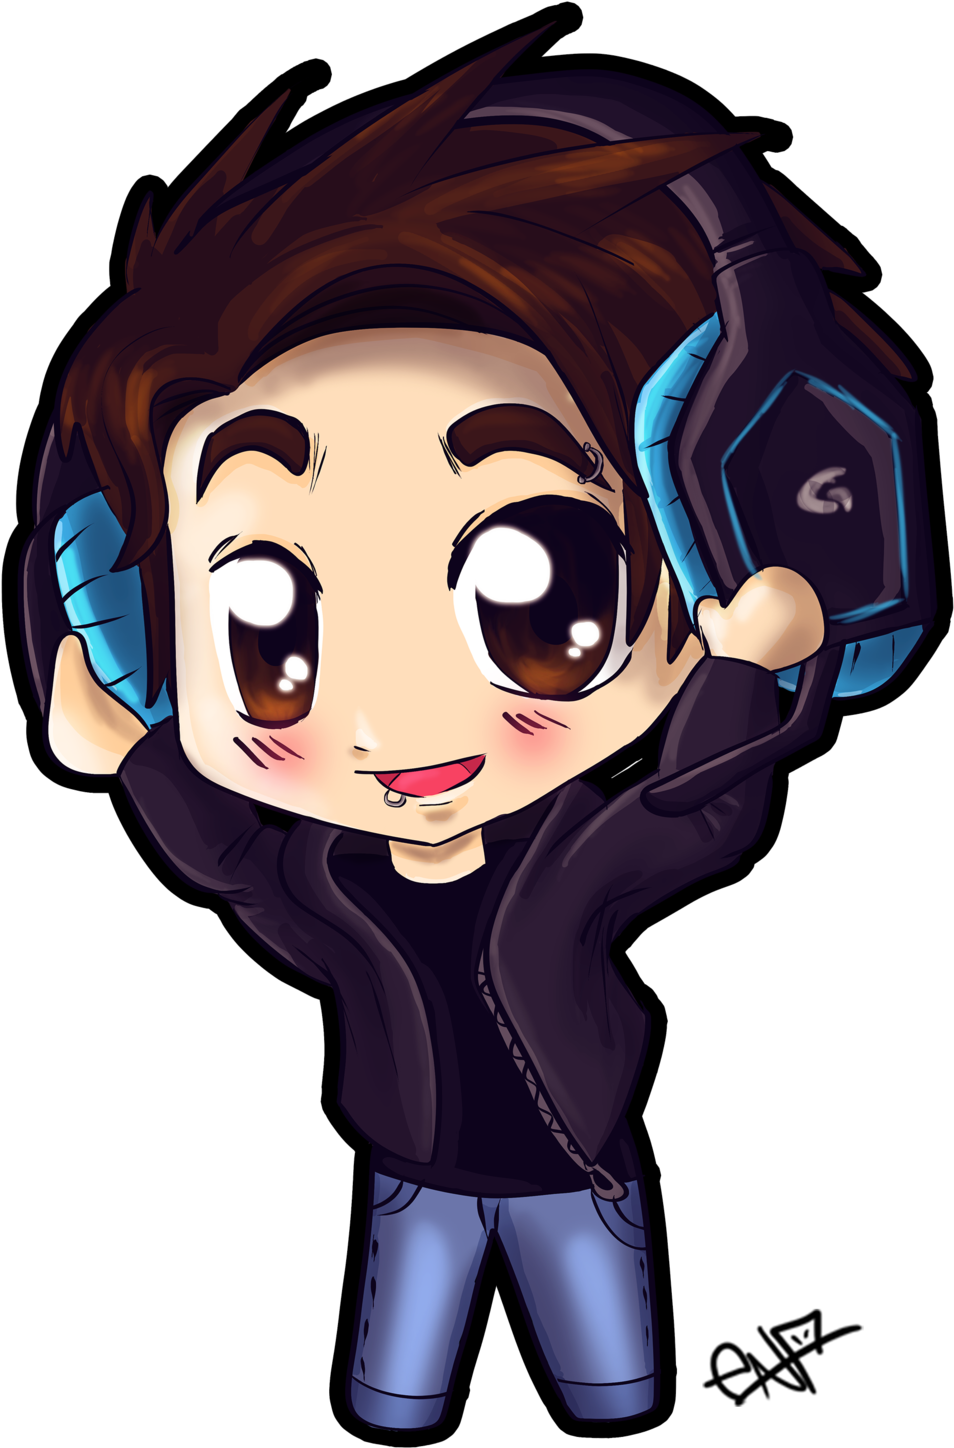 Chibi Boy With Headphones By Ena The Original - Chibi Boy With Headphones (1024x1507)